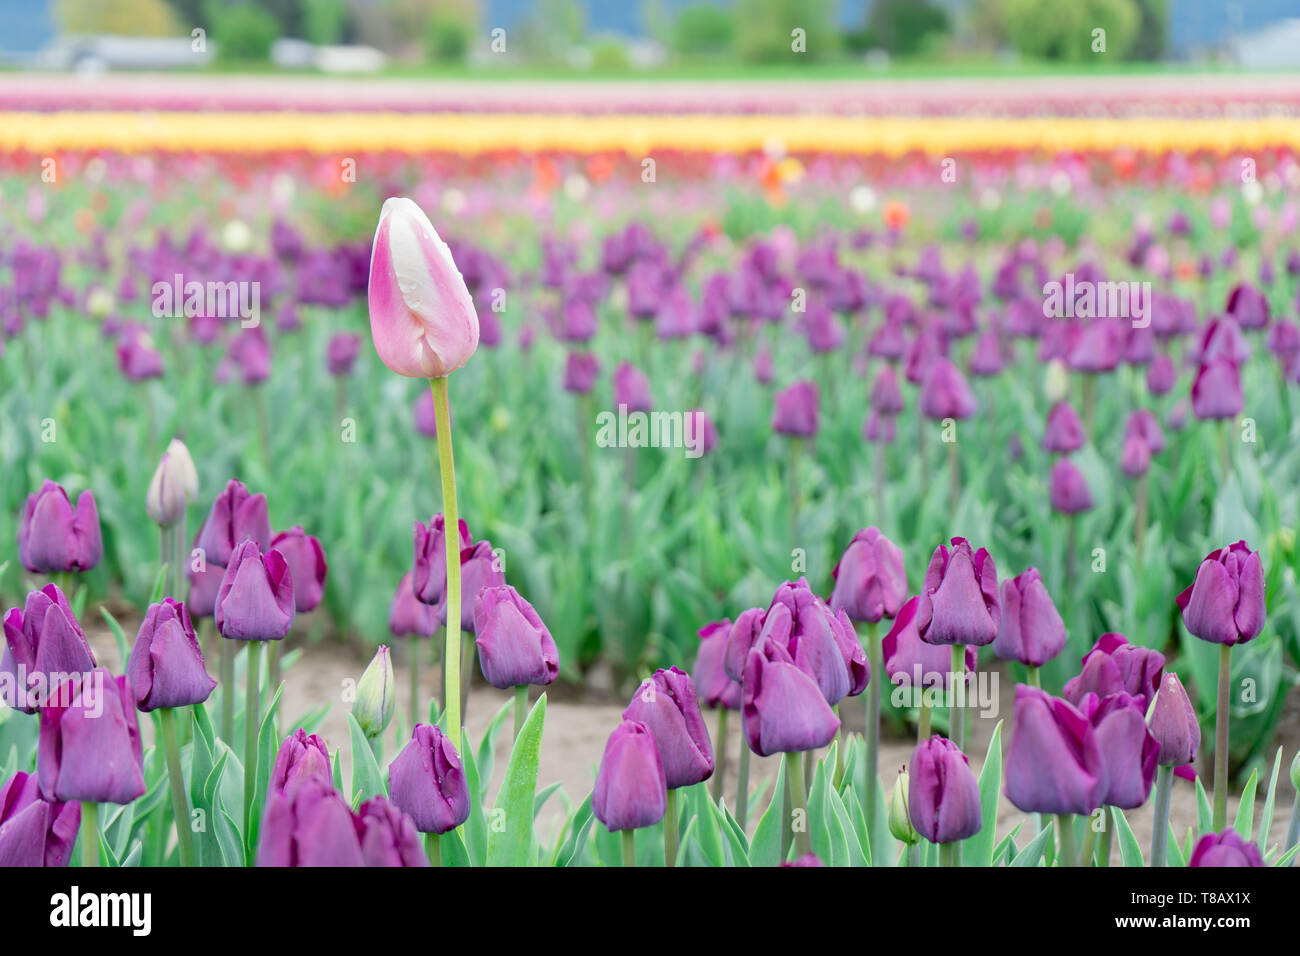 Beautiful, single, different pink and white tulip growing tall in a field of purple triumph tulips, on a flower farm. Stock Photo